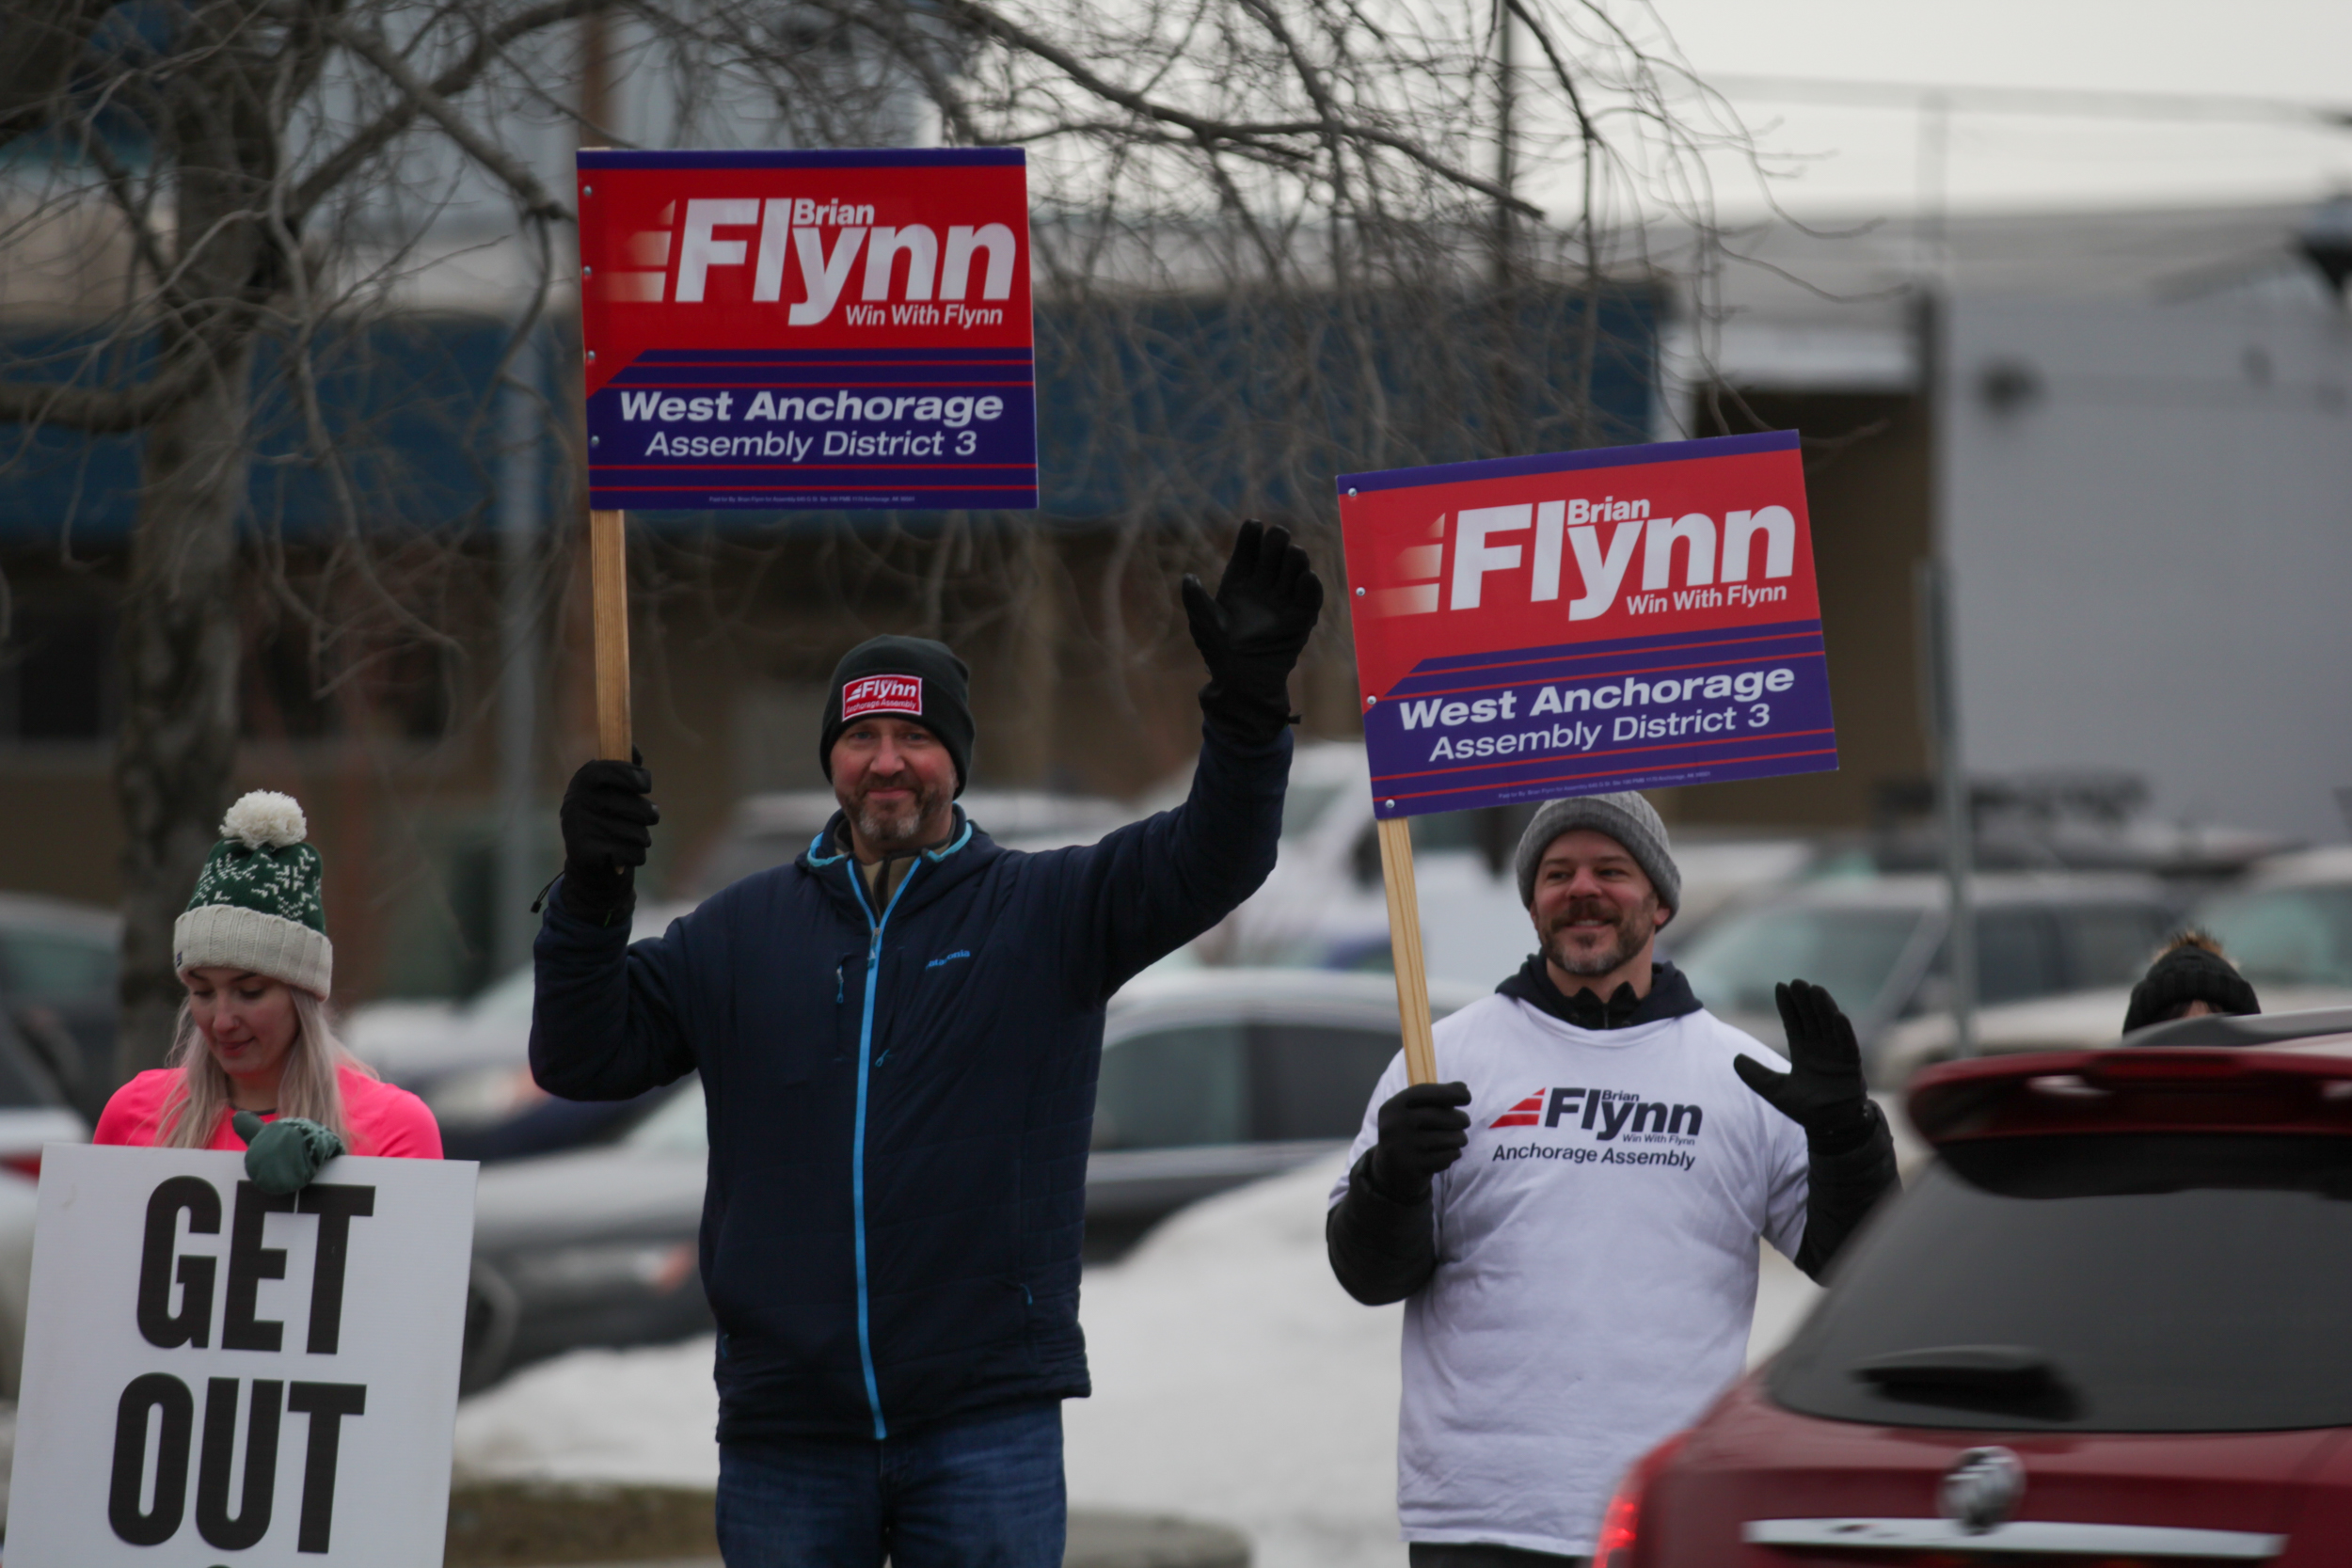 Two men holding political signs wave to traffic at an intersection.